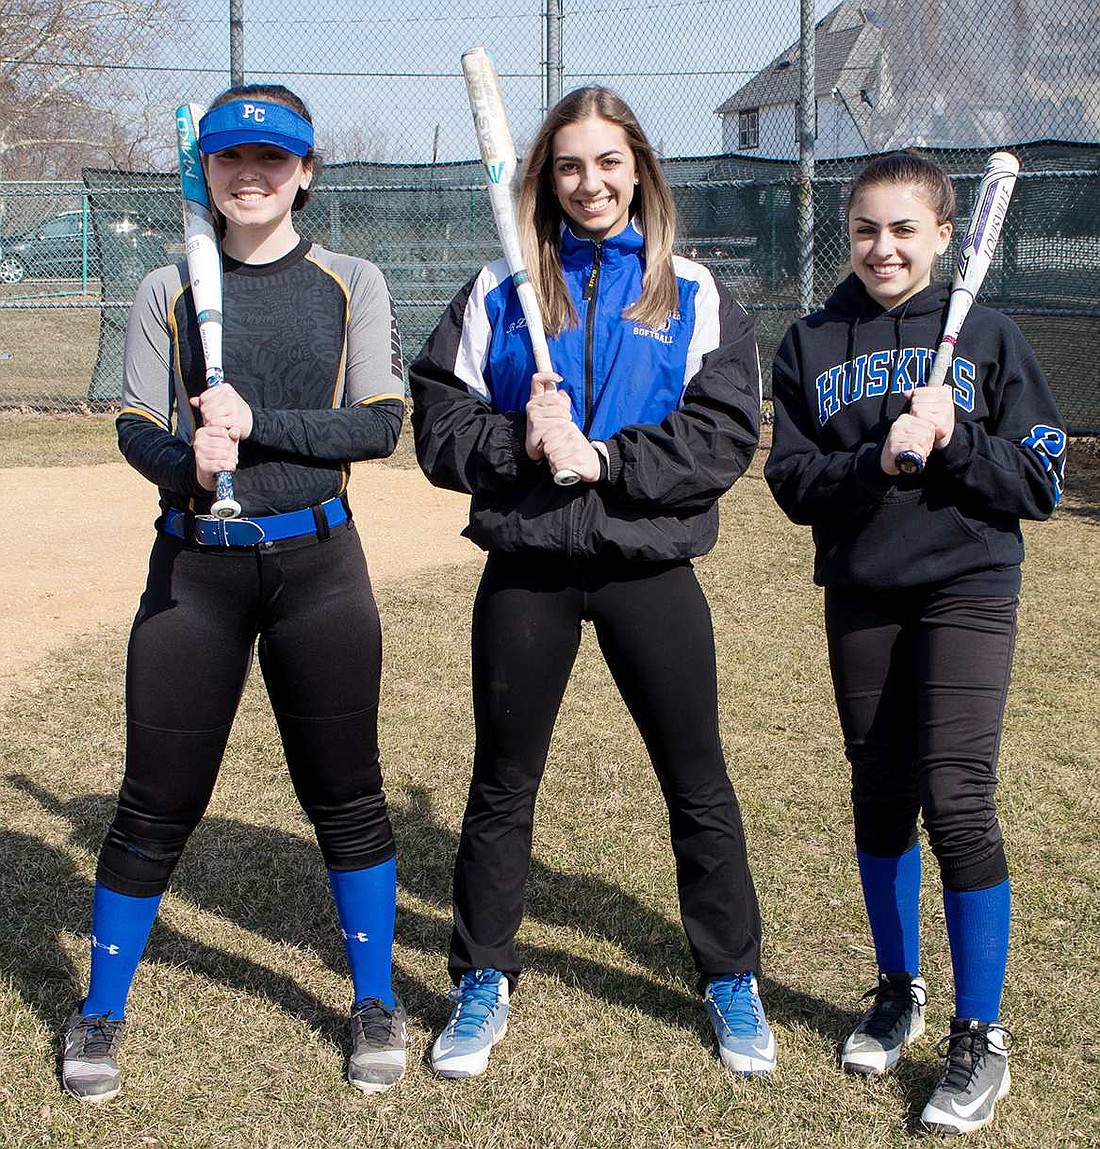 Lack of pre-season scrimmages hurts Lady Rams softball team 